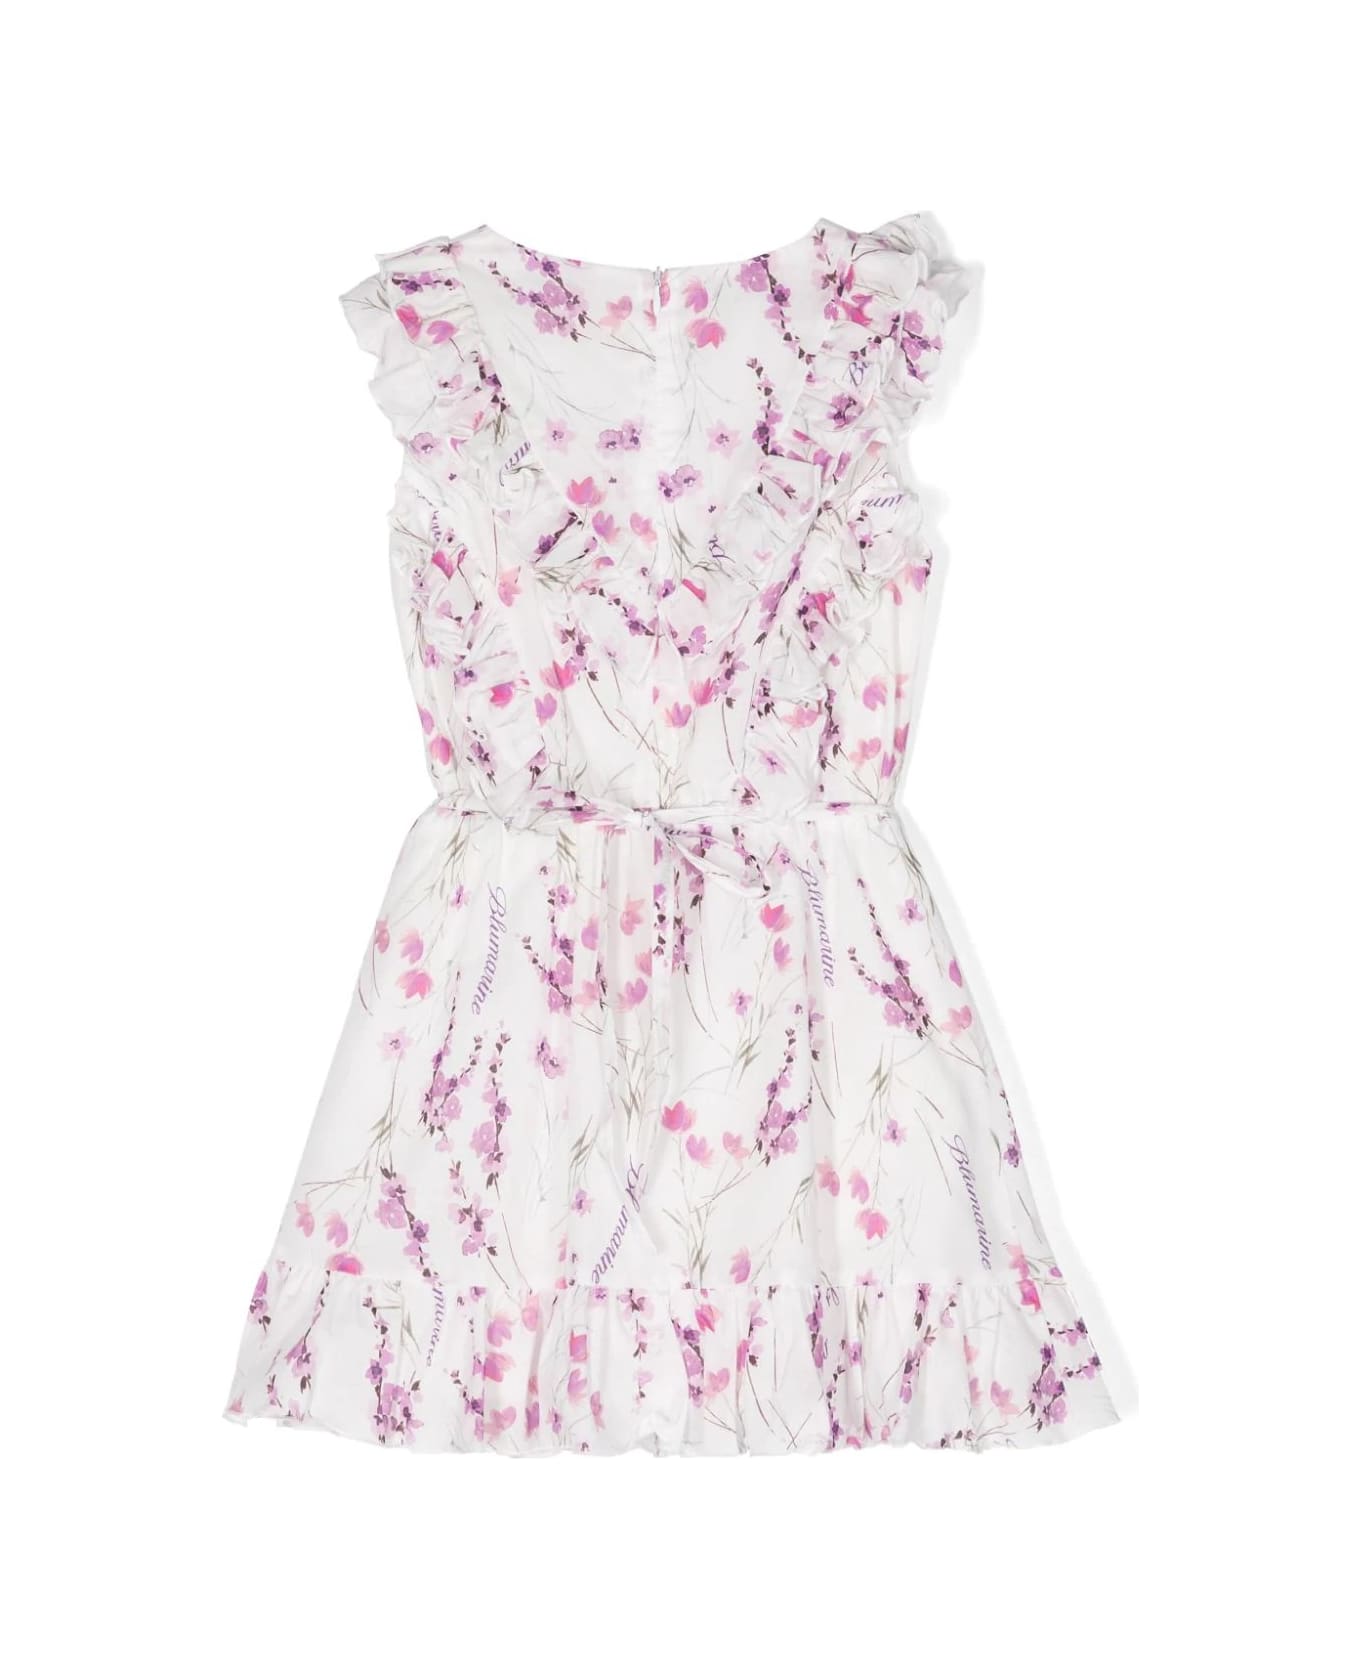 Miss Blumarine White Dress With Ruffles And Floral Print - White